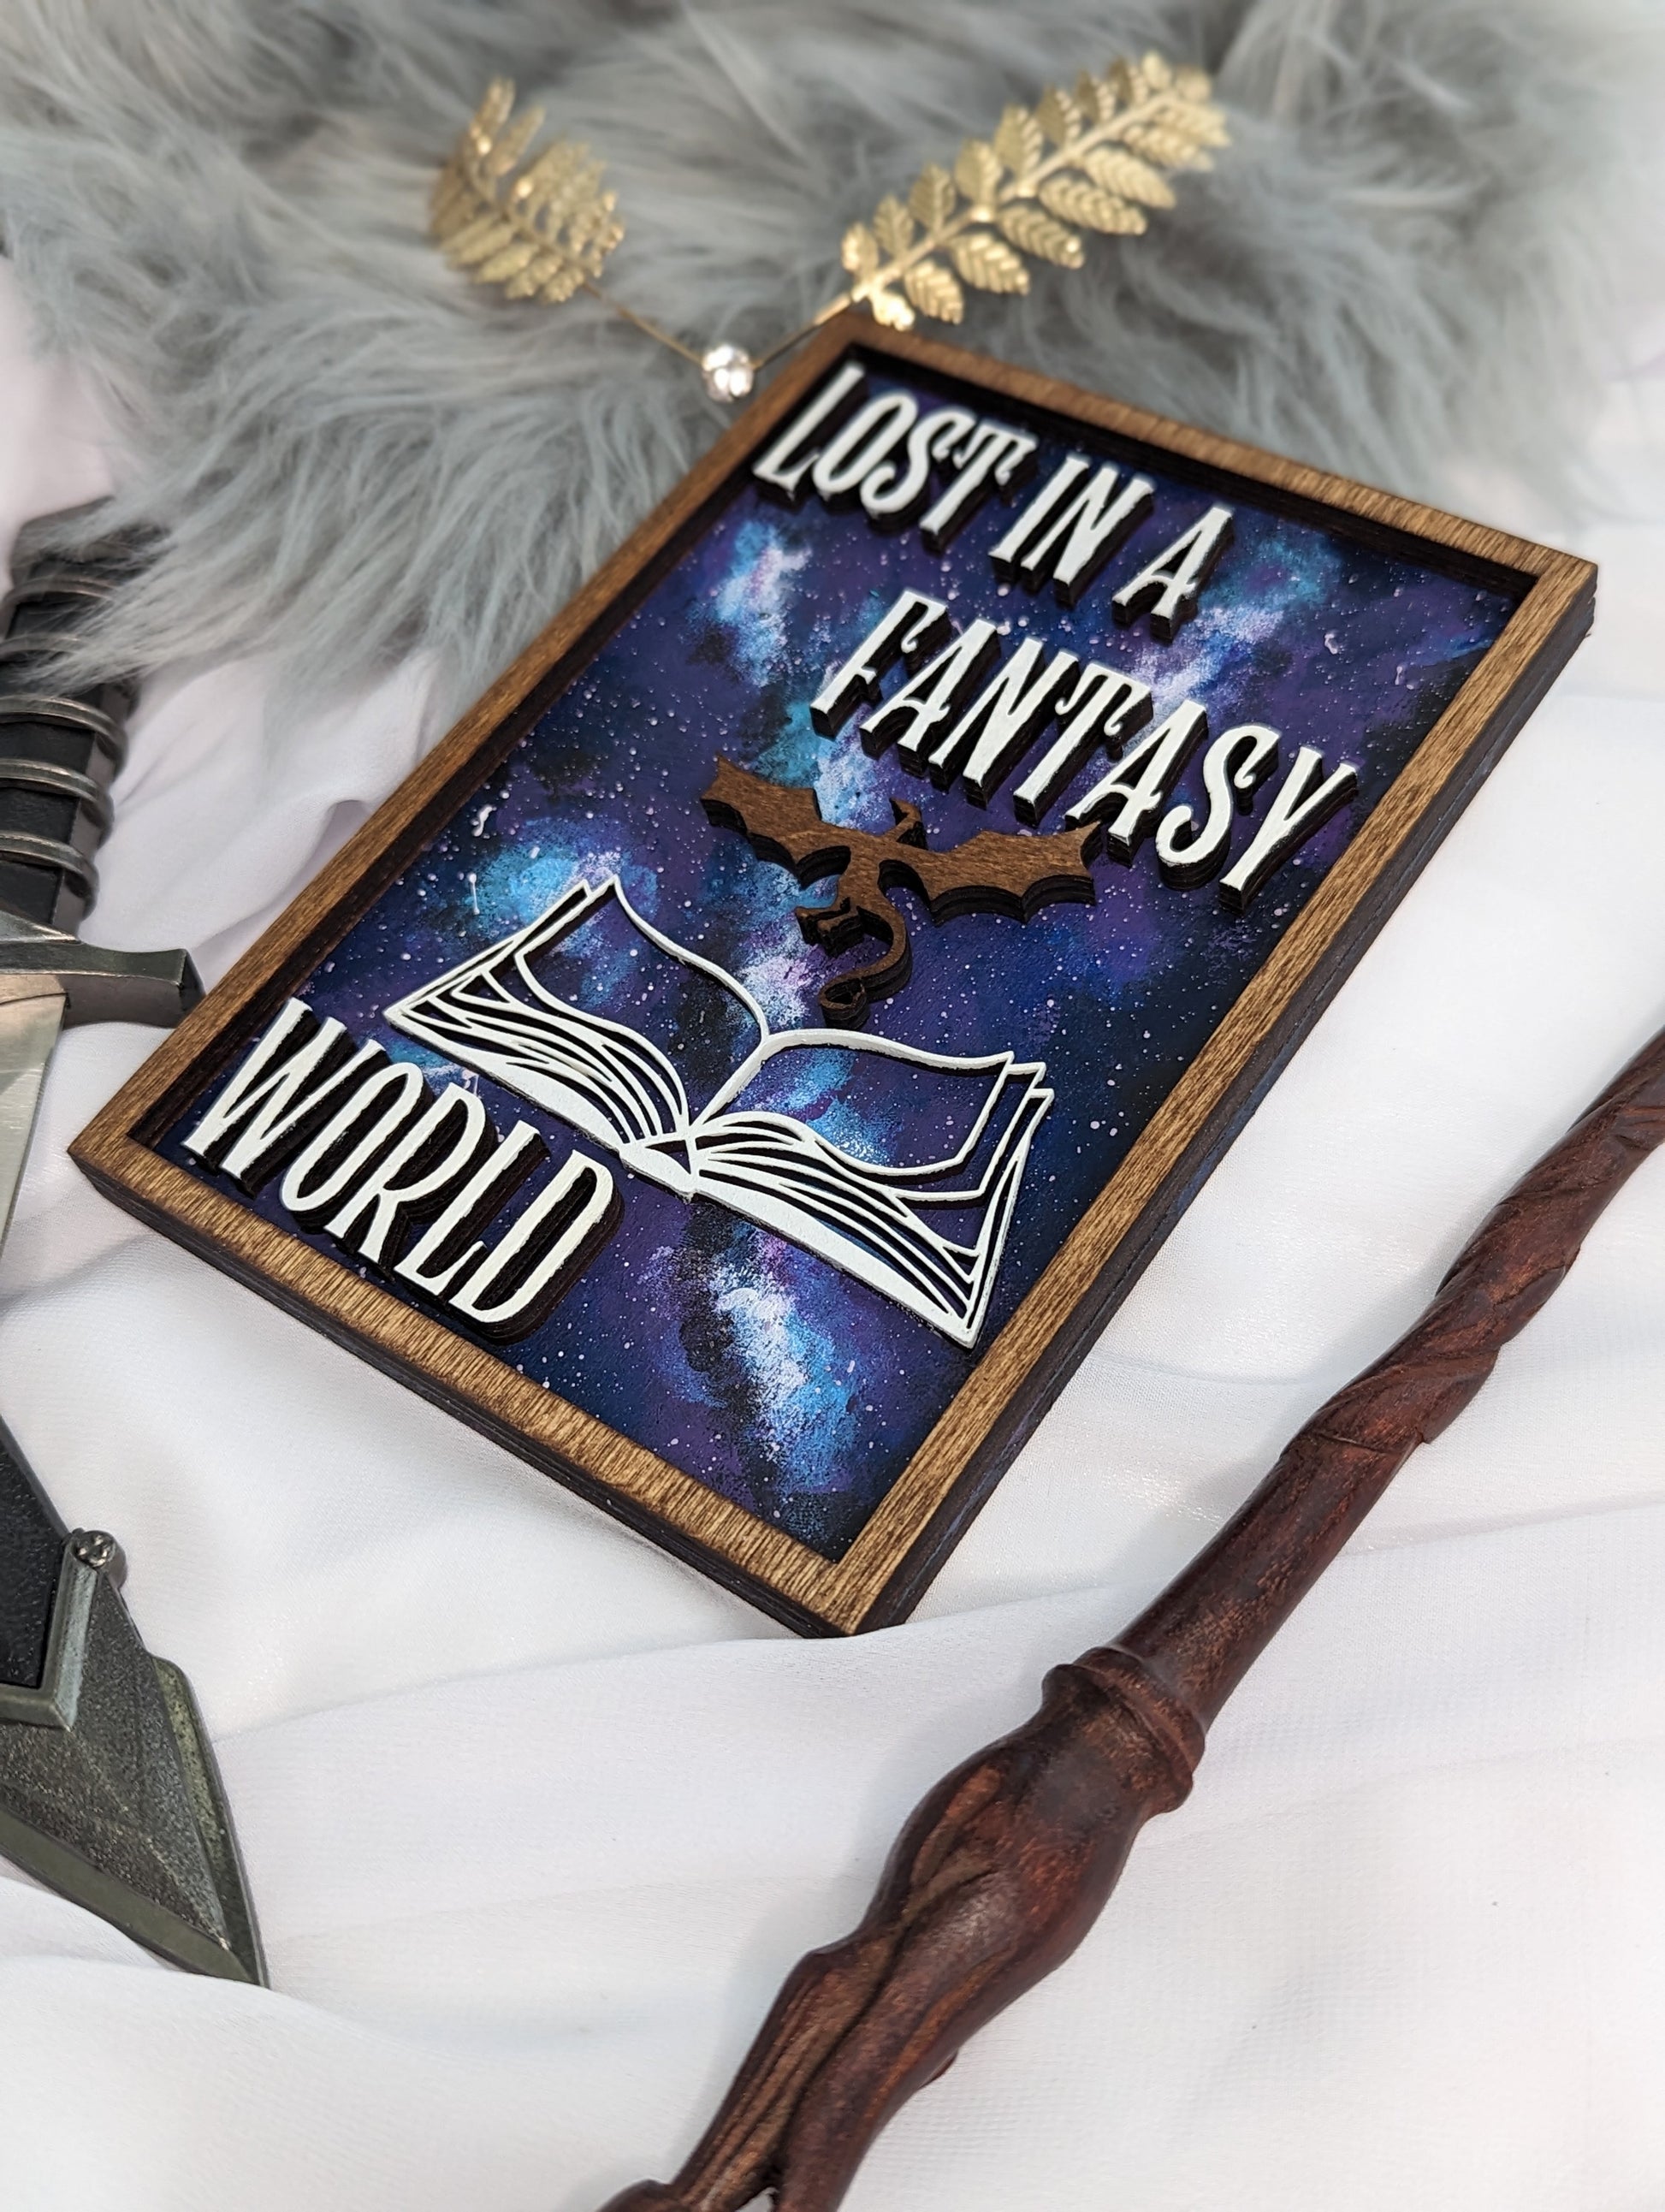 Lost in a Fantasy World | Wooden Bookshelf Sign - Quill & Cauldron